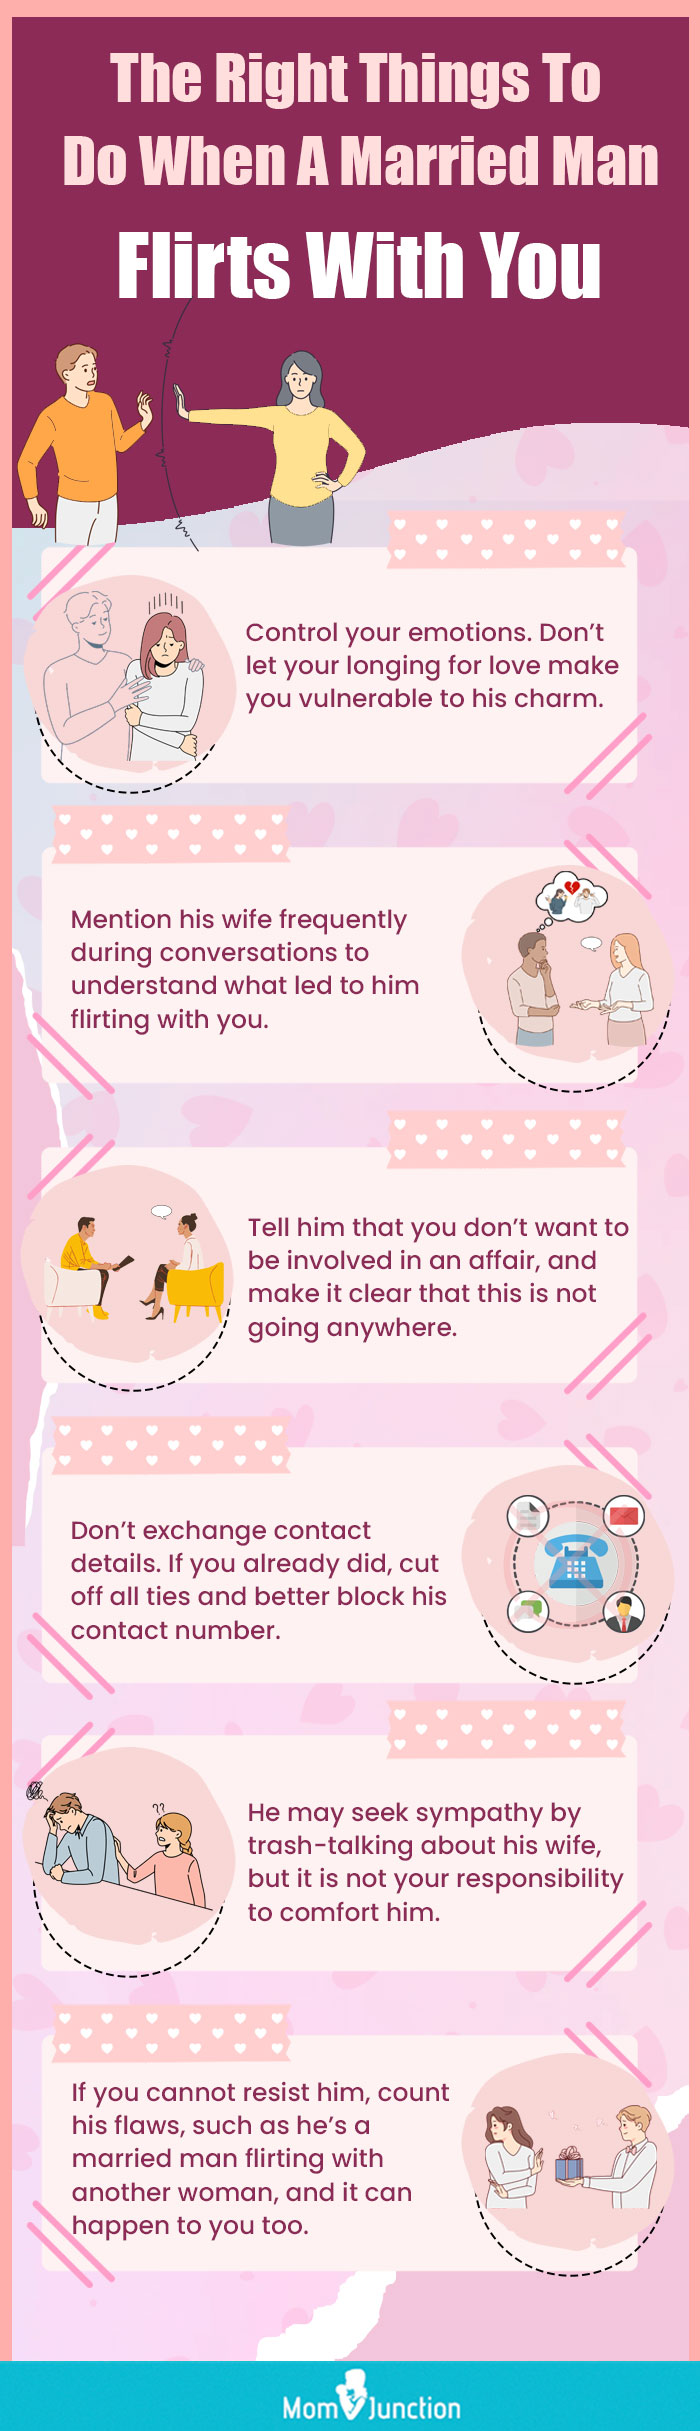 the right things to do when a married man flirts with you (infographic)